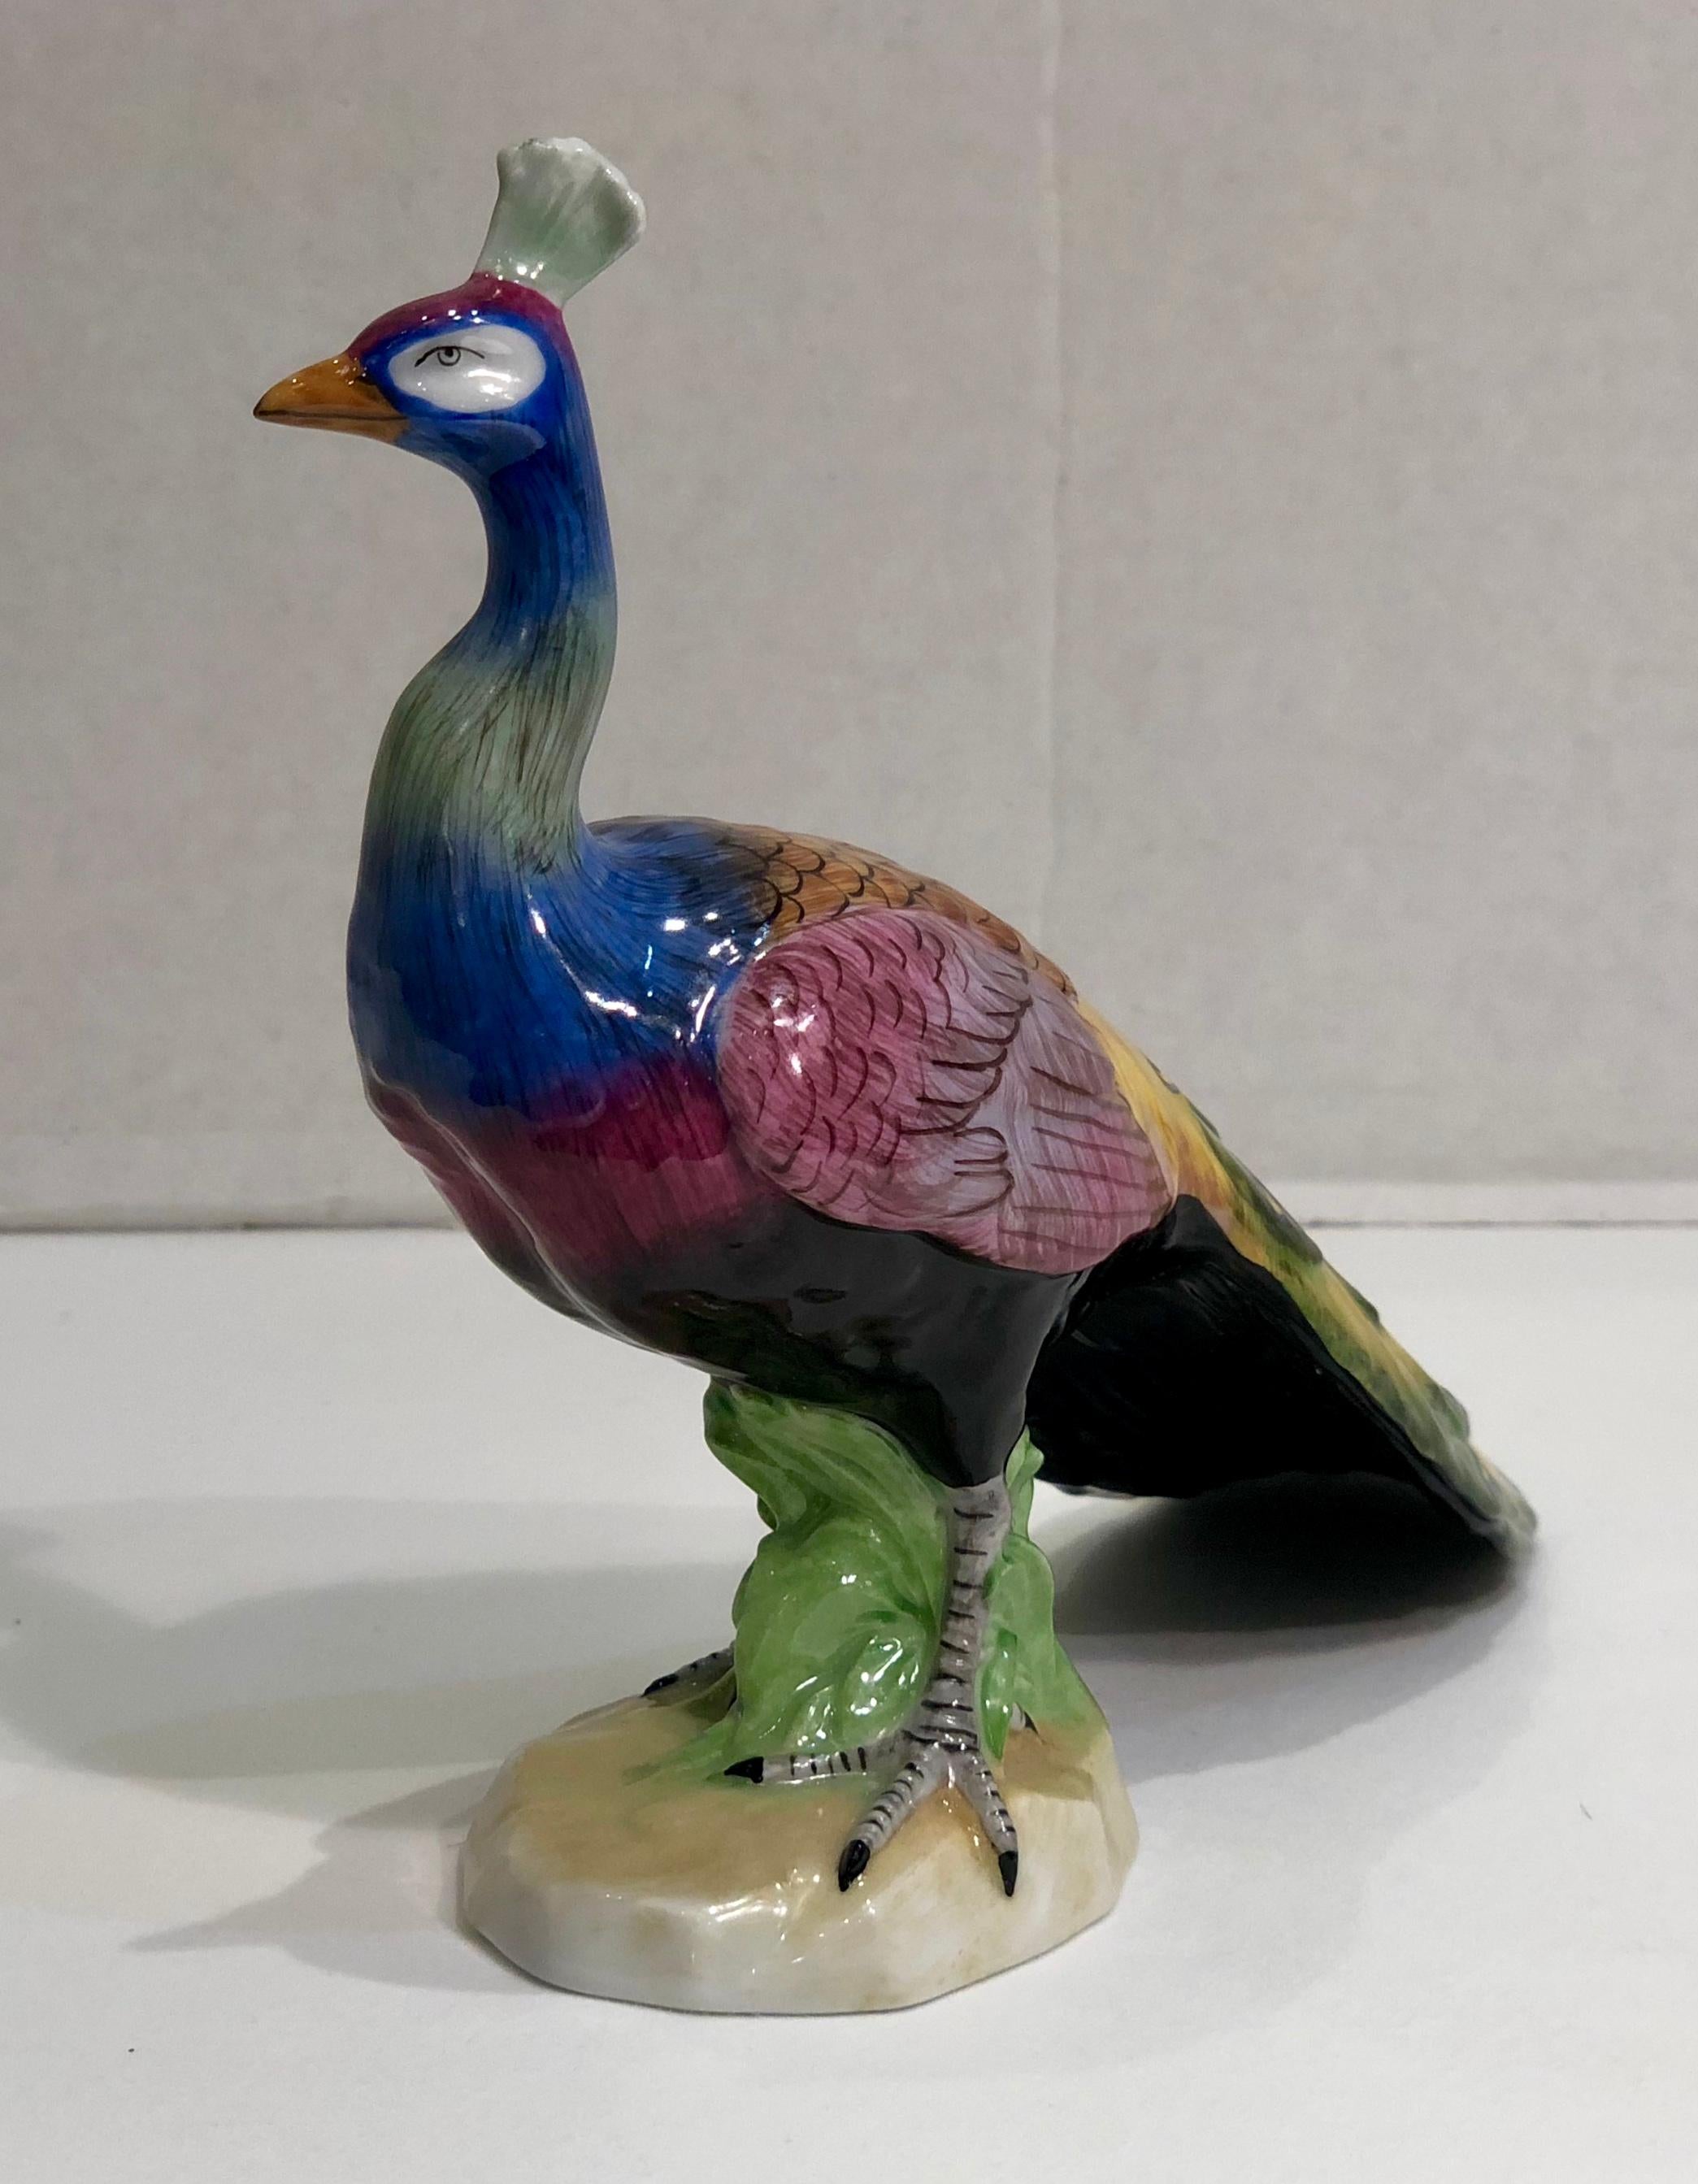 Handmade, hand painted, collectible estate figurine from Dresden Porcelain in Germany is a brightly colored, beautifully sculpted, proud male peacock who is facing forward, with his tail closed. This figurine is currently in production and retails